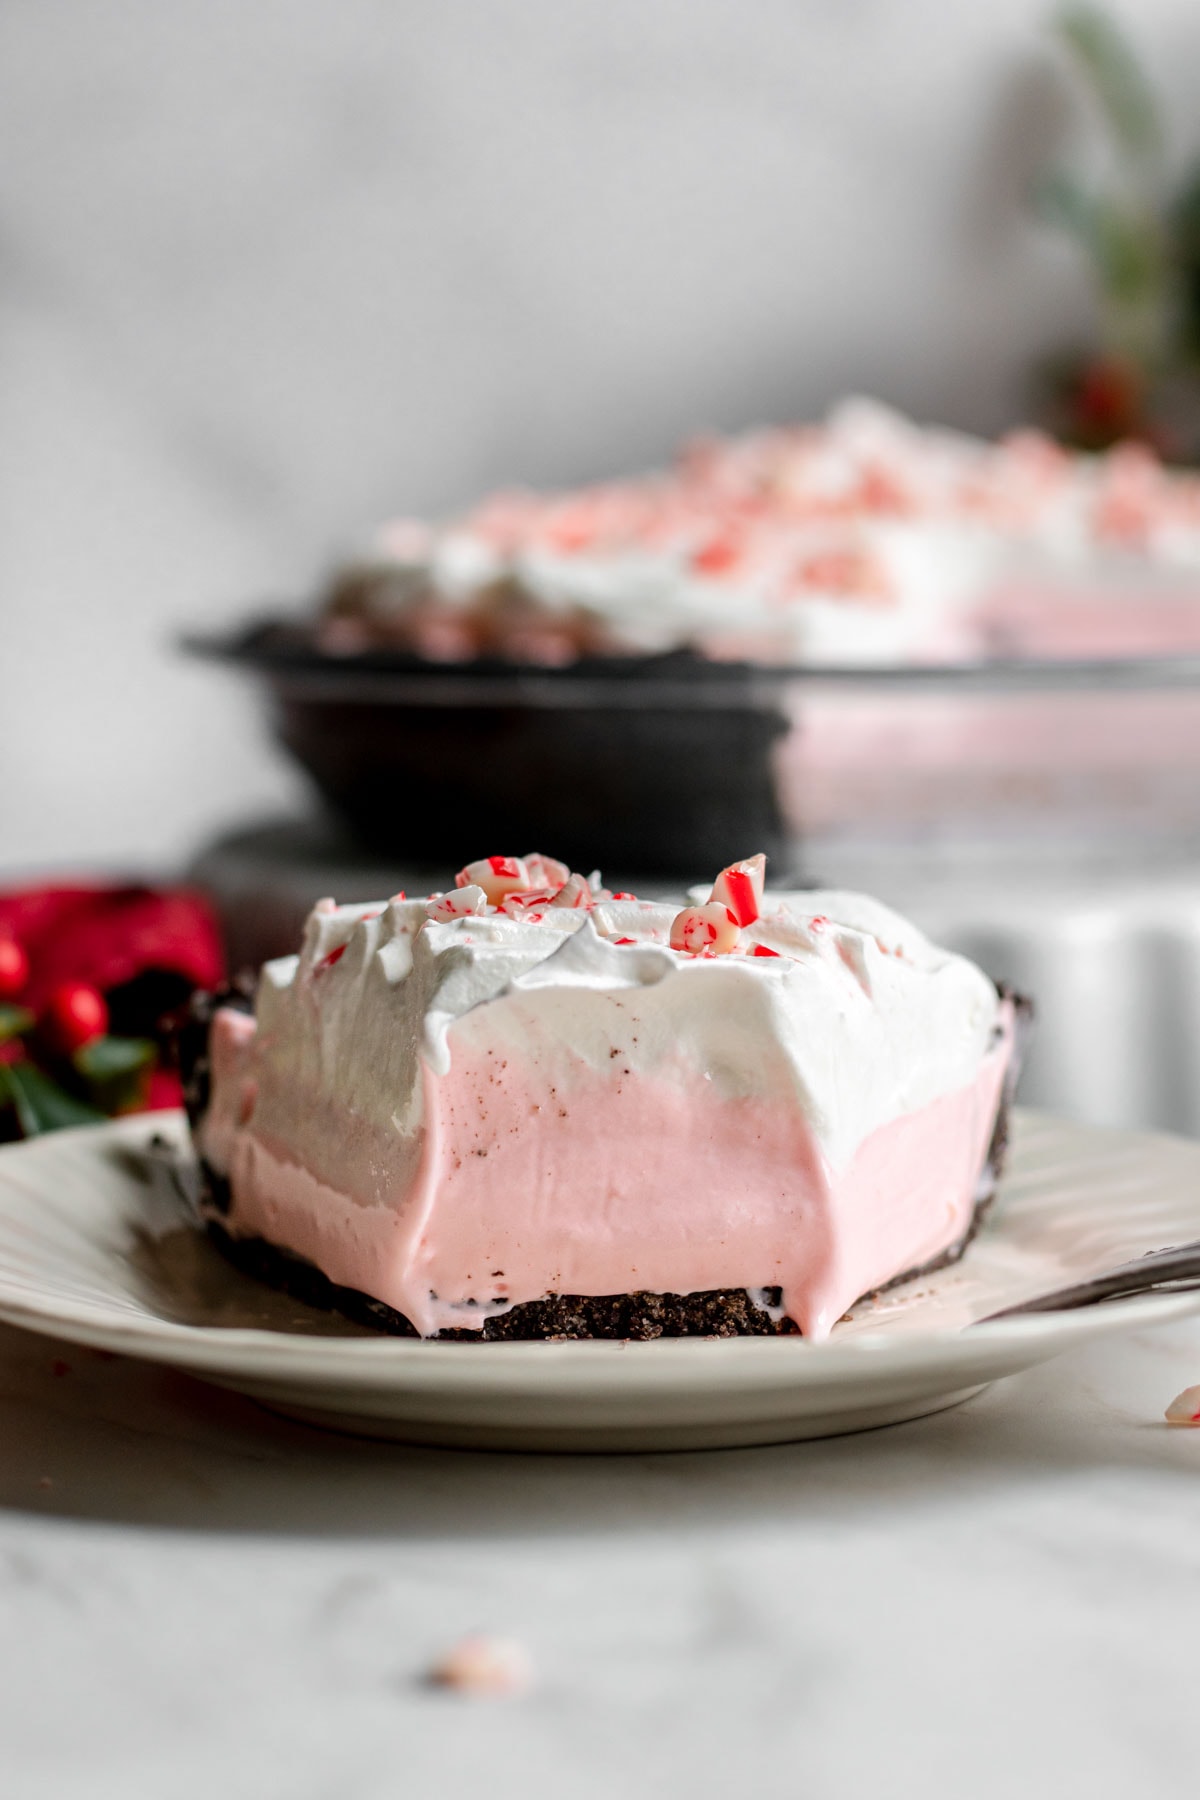 Candy Cane Pie slice on serving plate with spoonful taken out